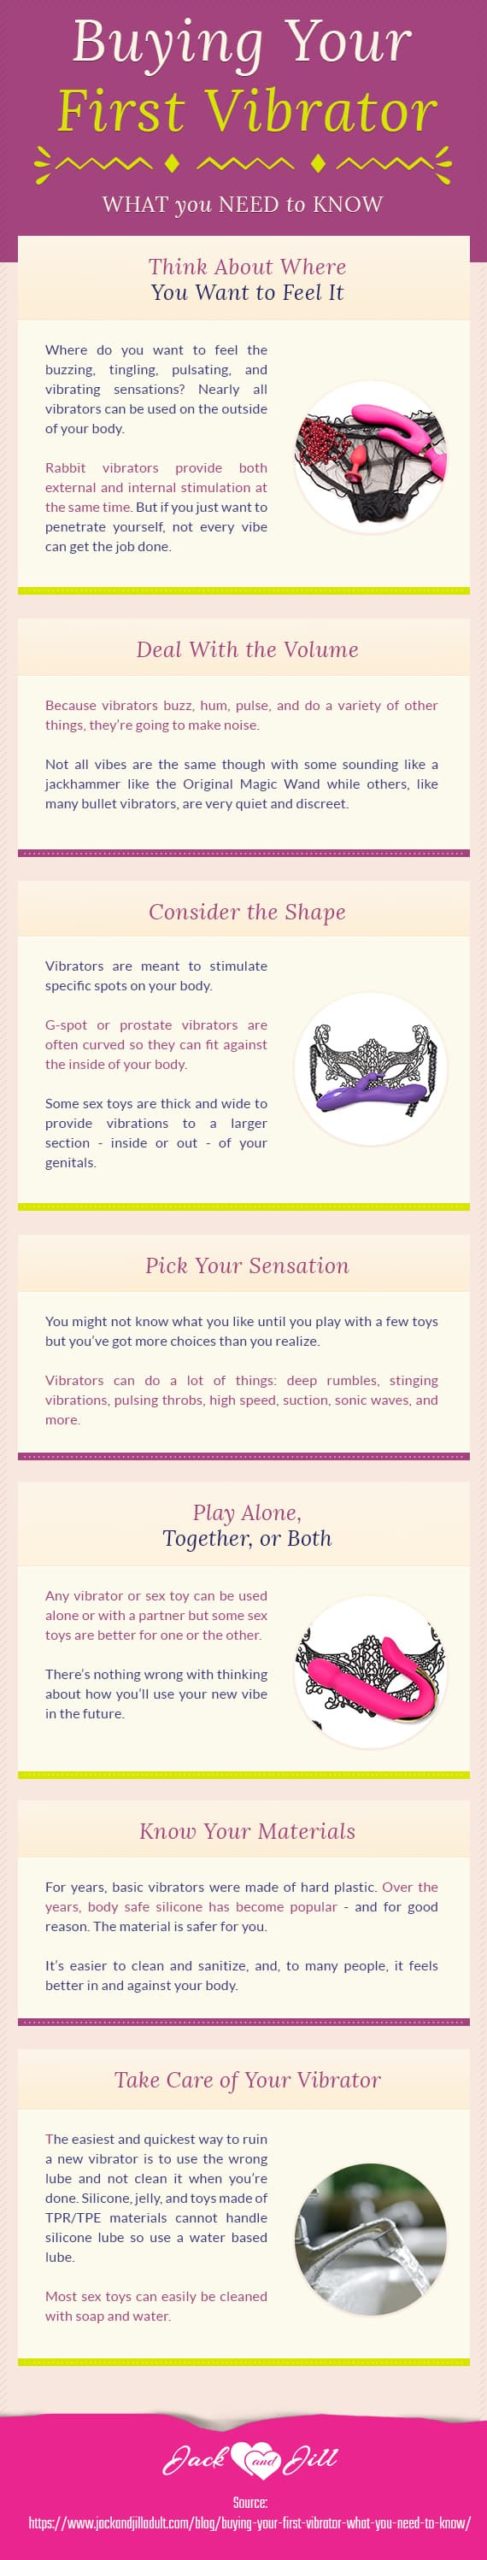 Infographic for Buying Your First Vibrator: What You Need to Know